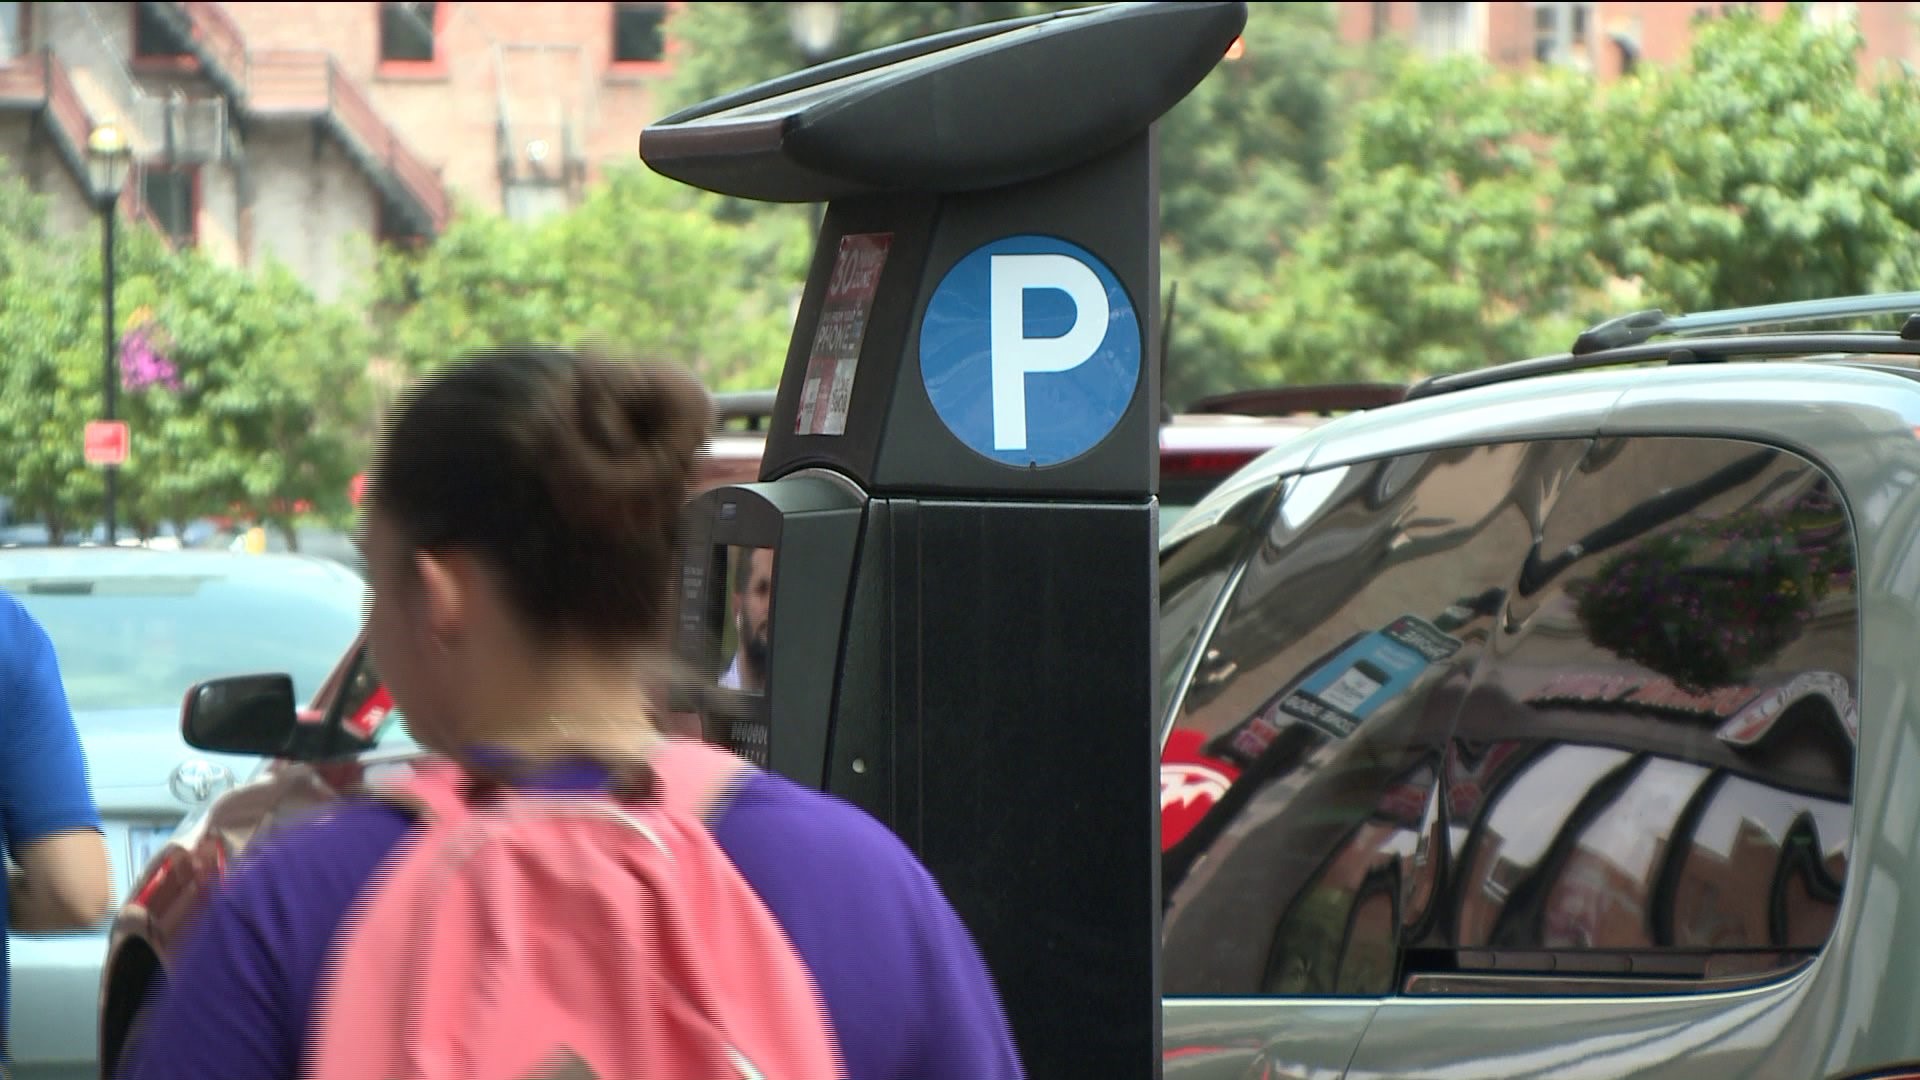 Hartford Parking Authority changes stance after rejecting coins as payment